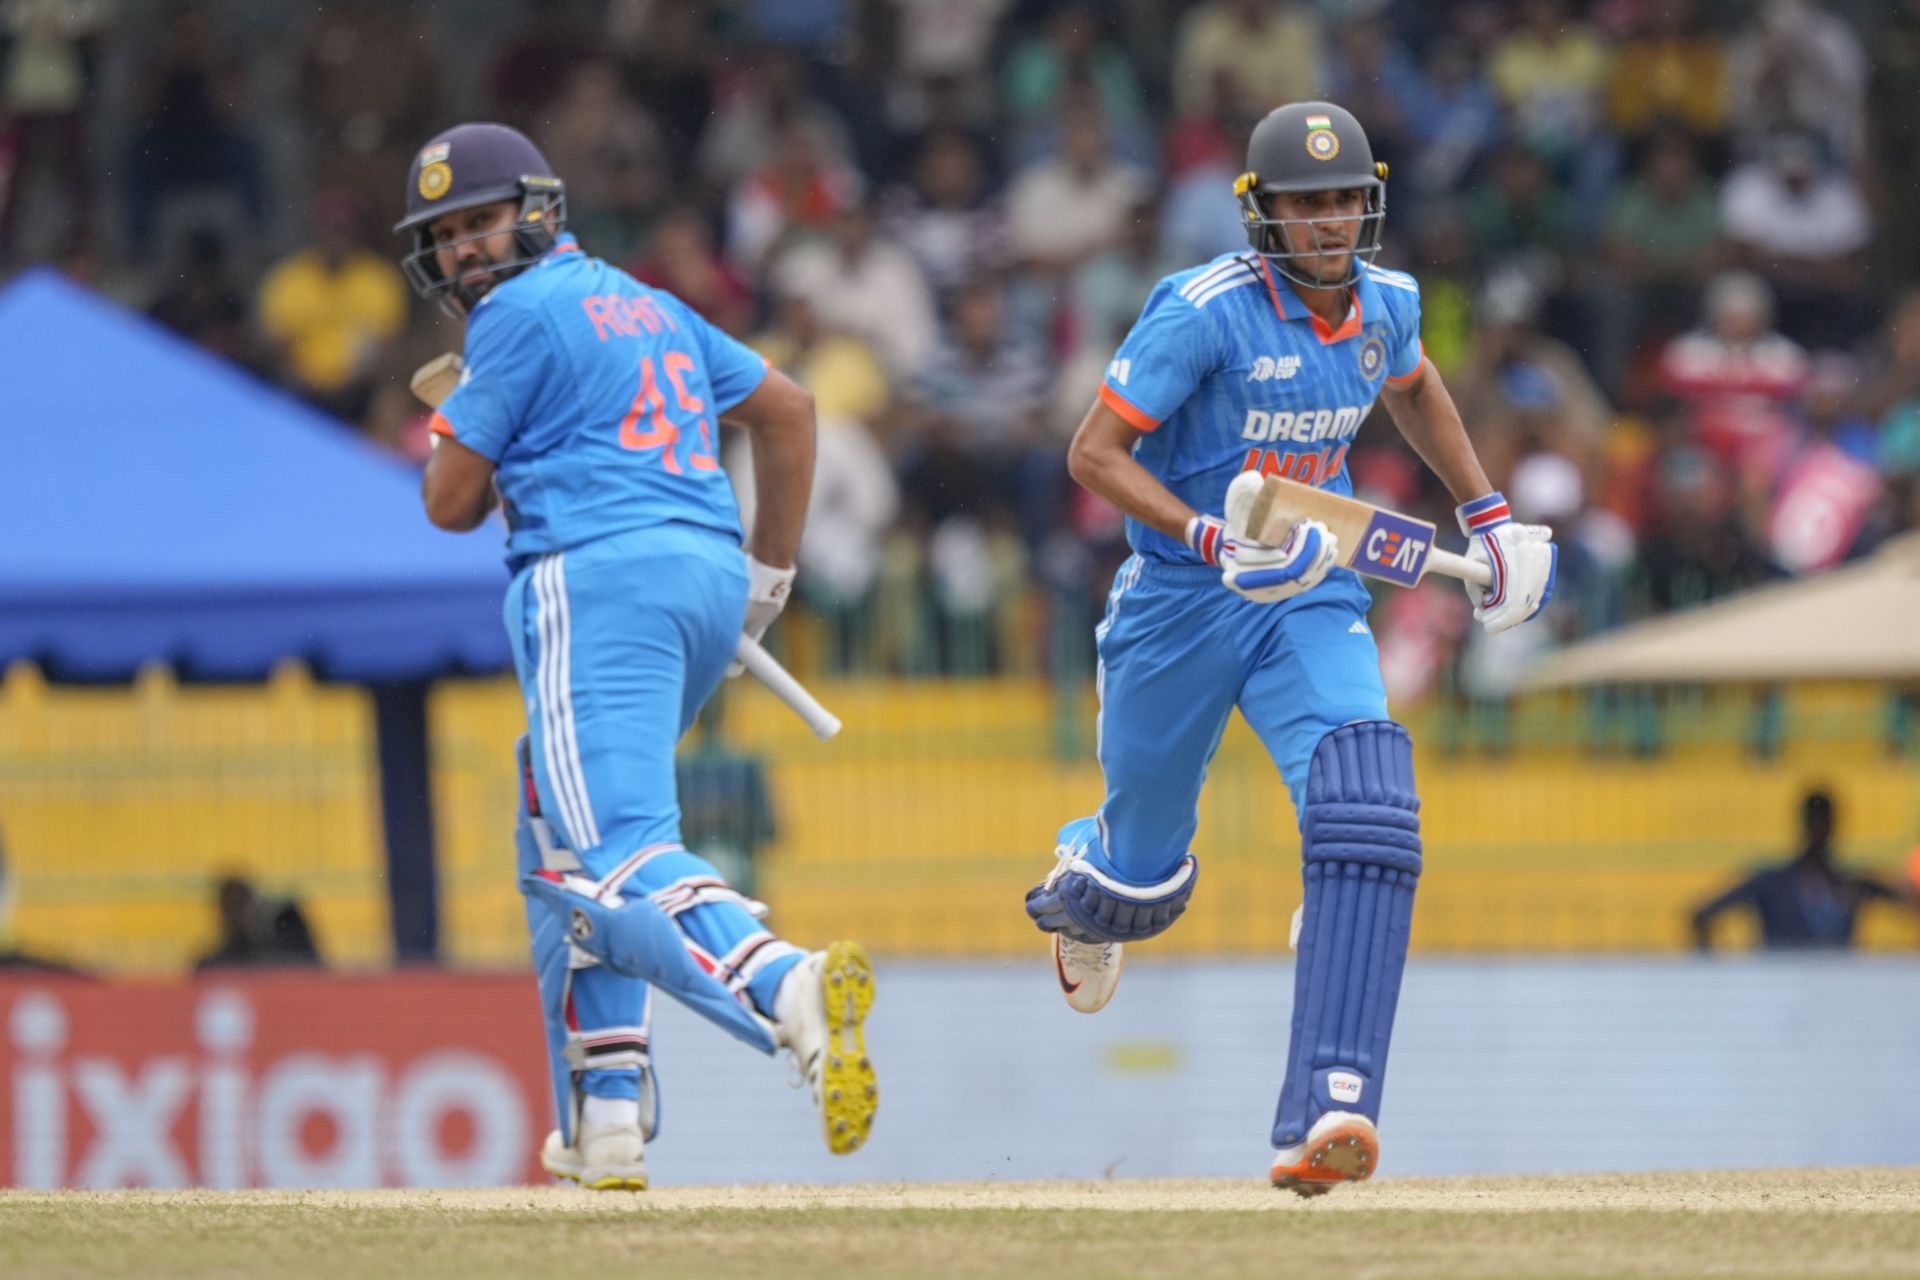 Rohit Sharma and Shubman added 121 runs for the first wicket. [P/C: AP]